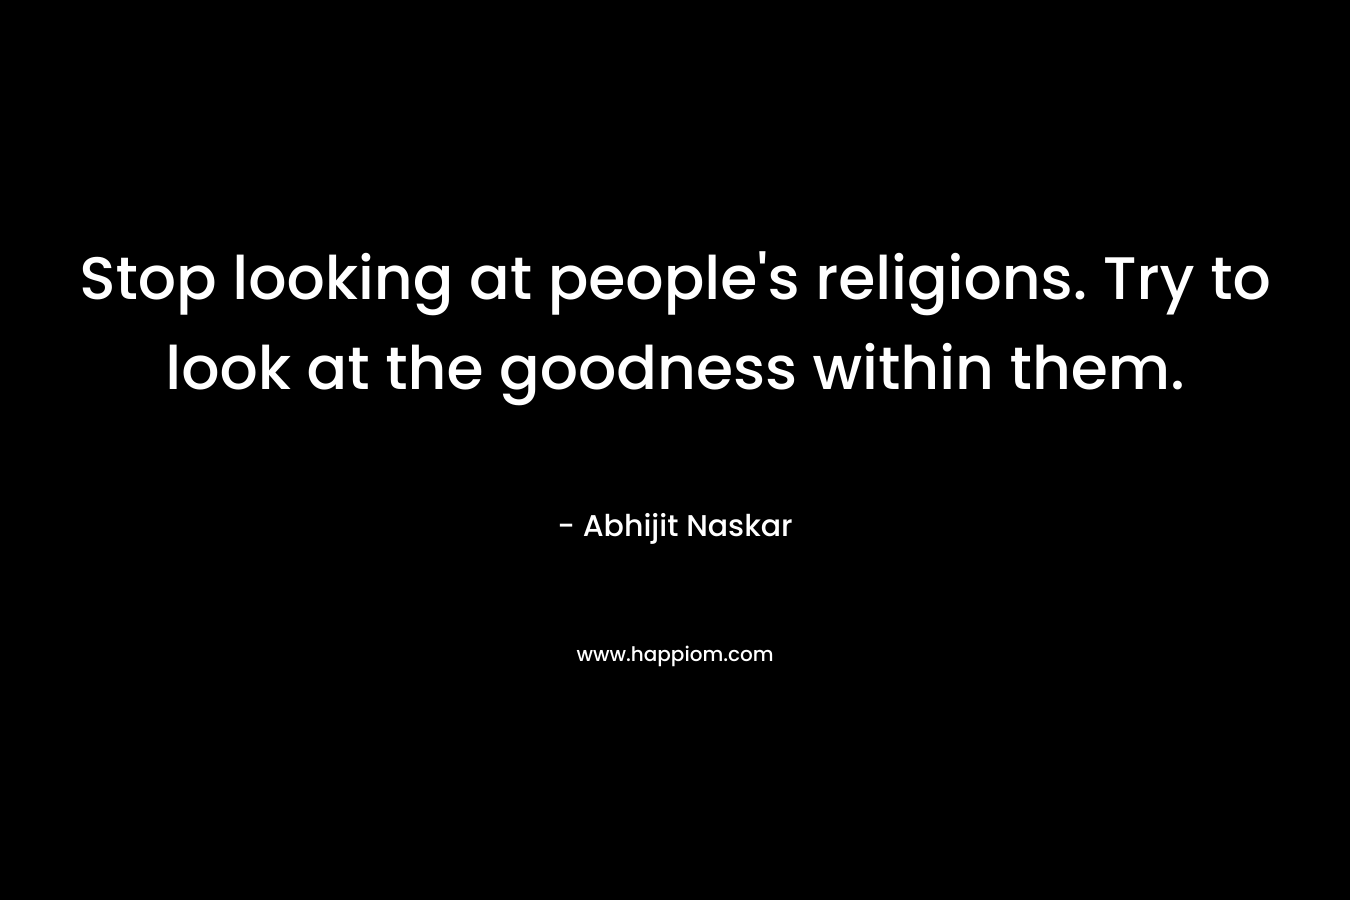 Stop looking at people's religions. Try to look at the goodness within them.